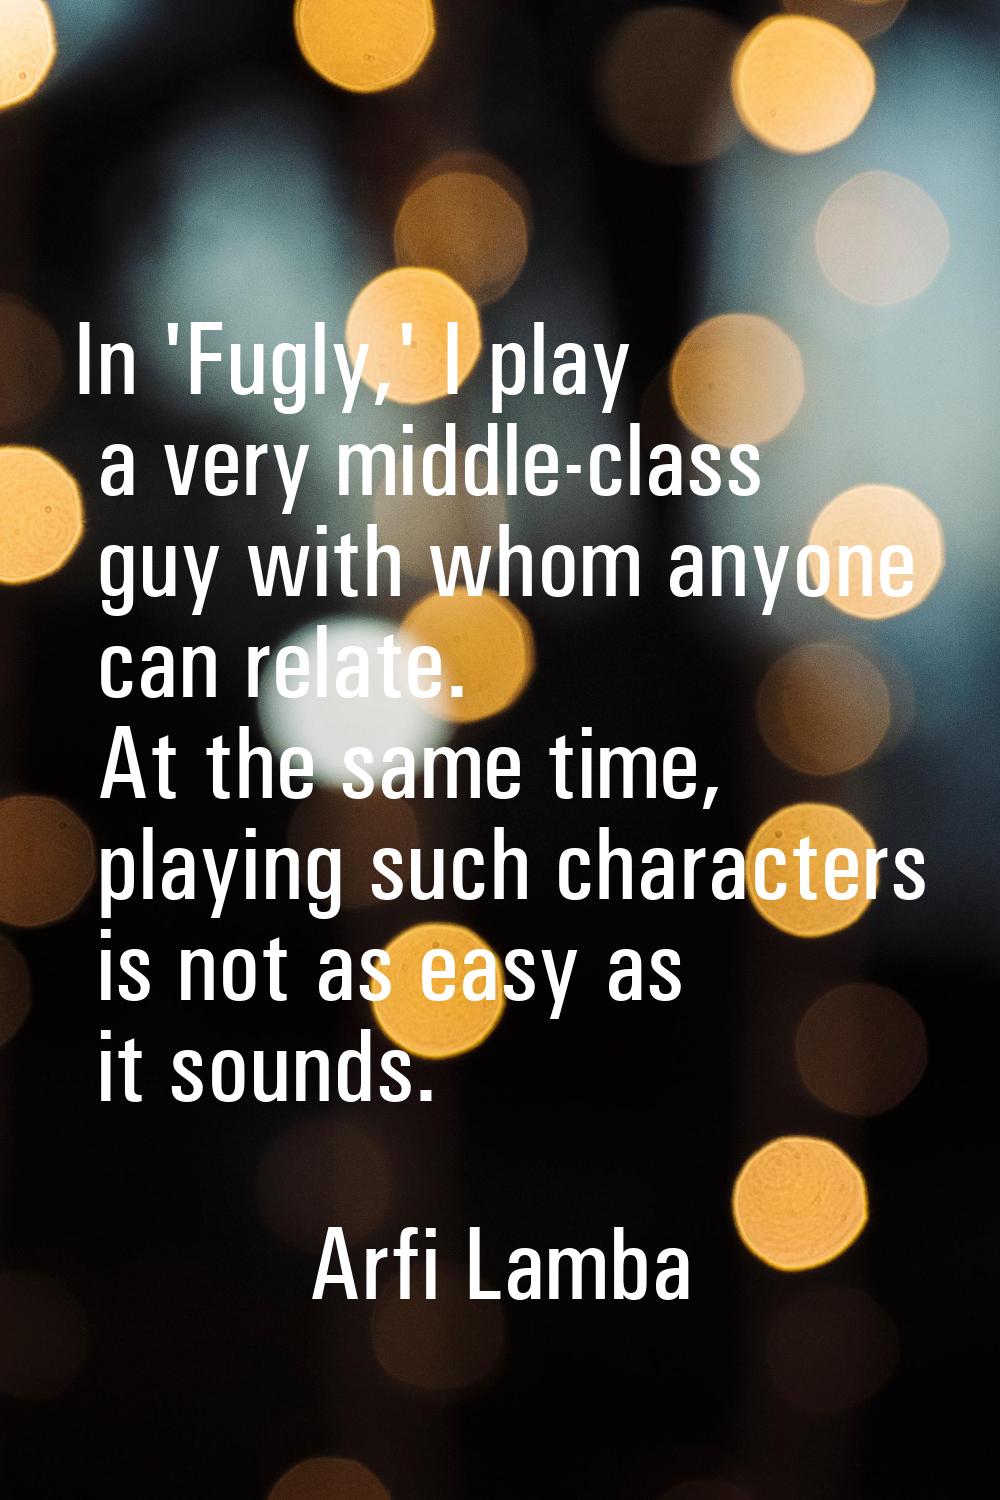 In 'Fugly,' I play a very middle-class guy with whom anyone can relate. At the same time, playing s